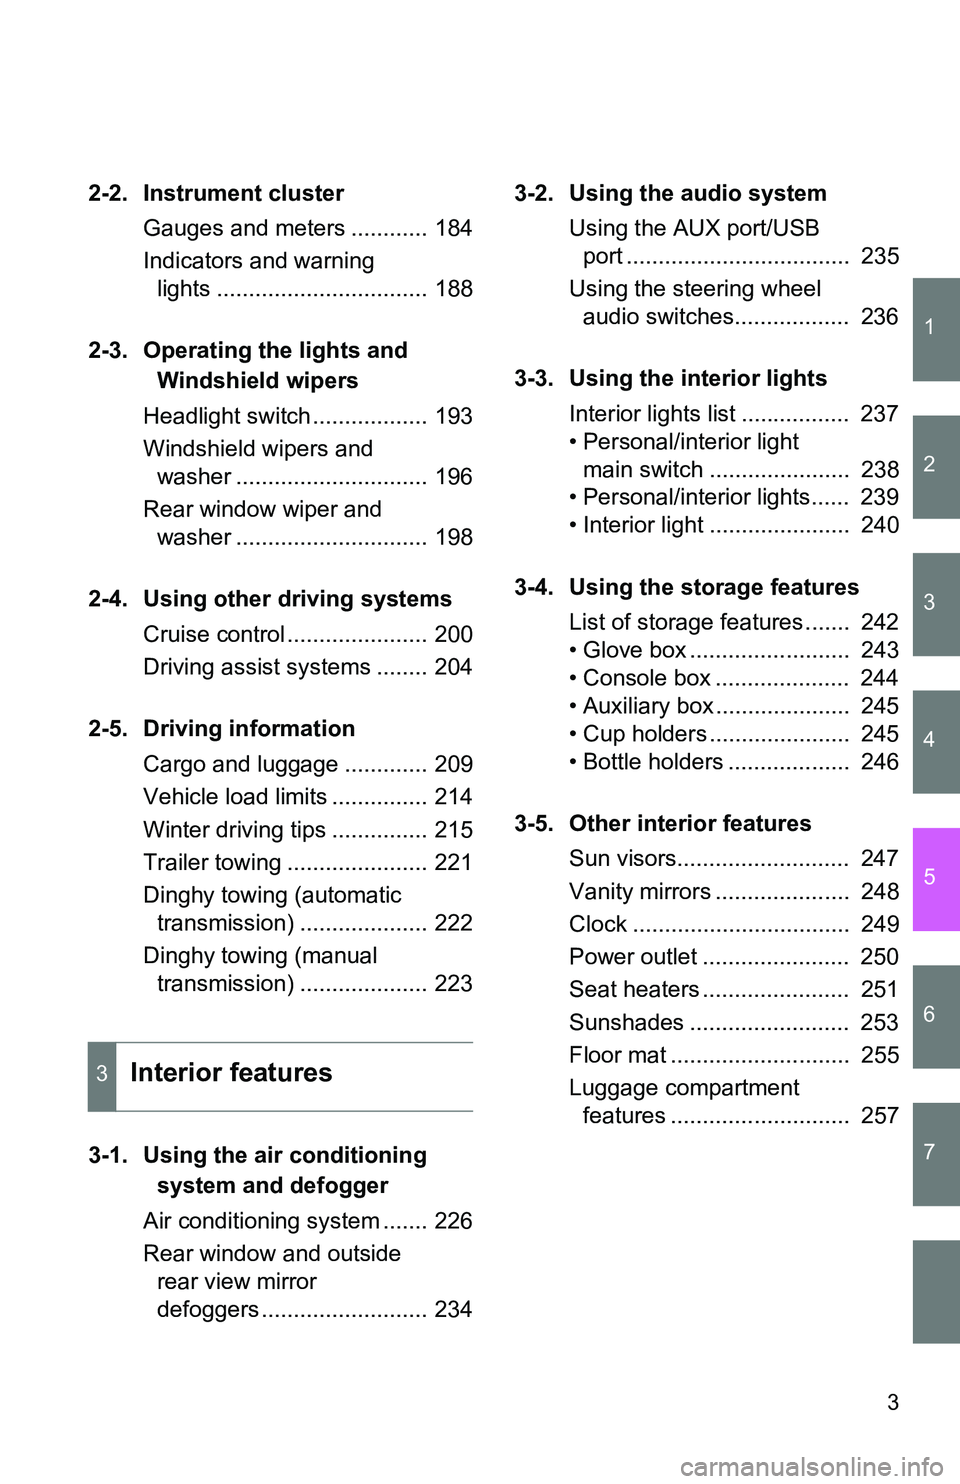 TOYOTA tC 2011  Owners Manual (in English) 1
2
3
4
5
6
7
3
2-2. Instrument clusterGauges and meters ............ 184
Indicators and warning lights ................................. 188
2-3. Operating the lights and  Windshield wipers
Headlight